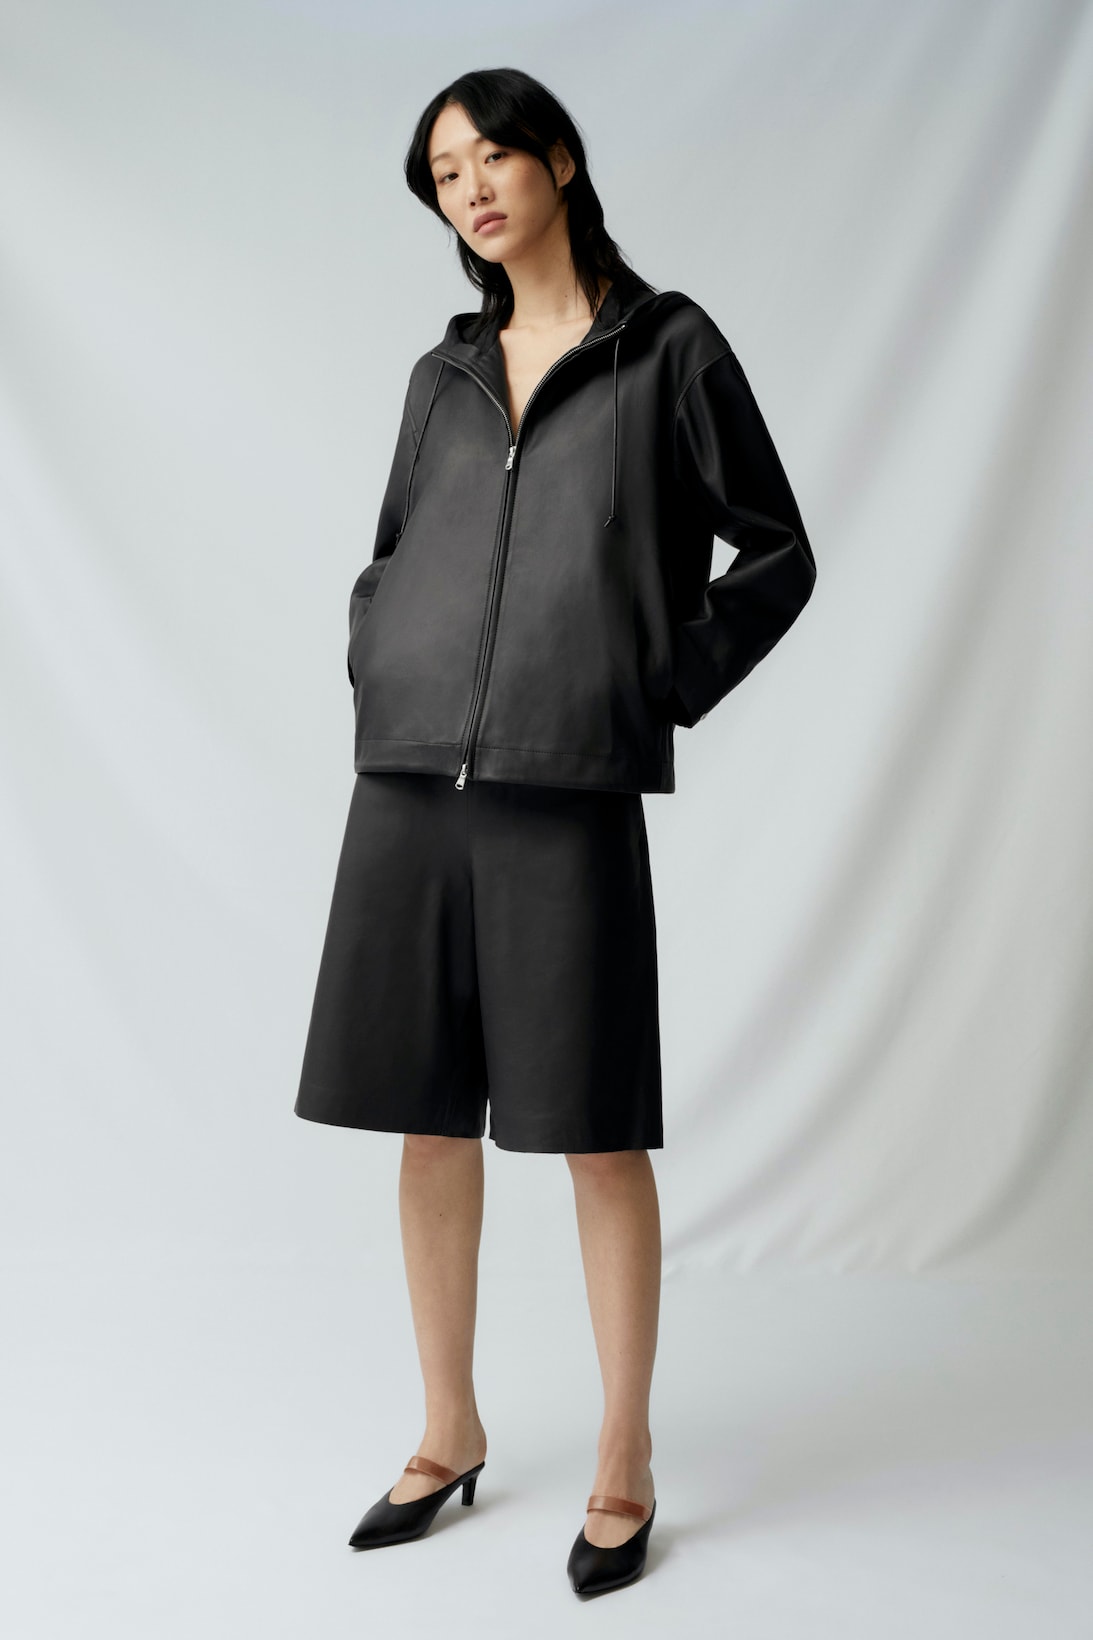 sora choi cos spring womenswear summer collection lookbook black jacket outerwear shorts heels shoes sandals